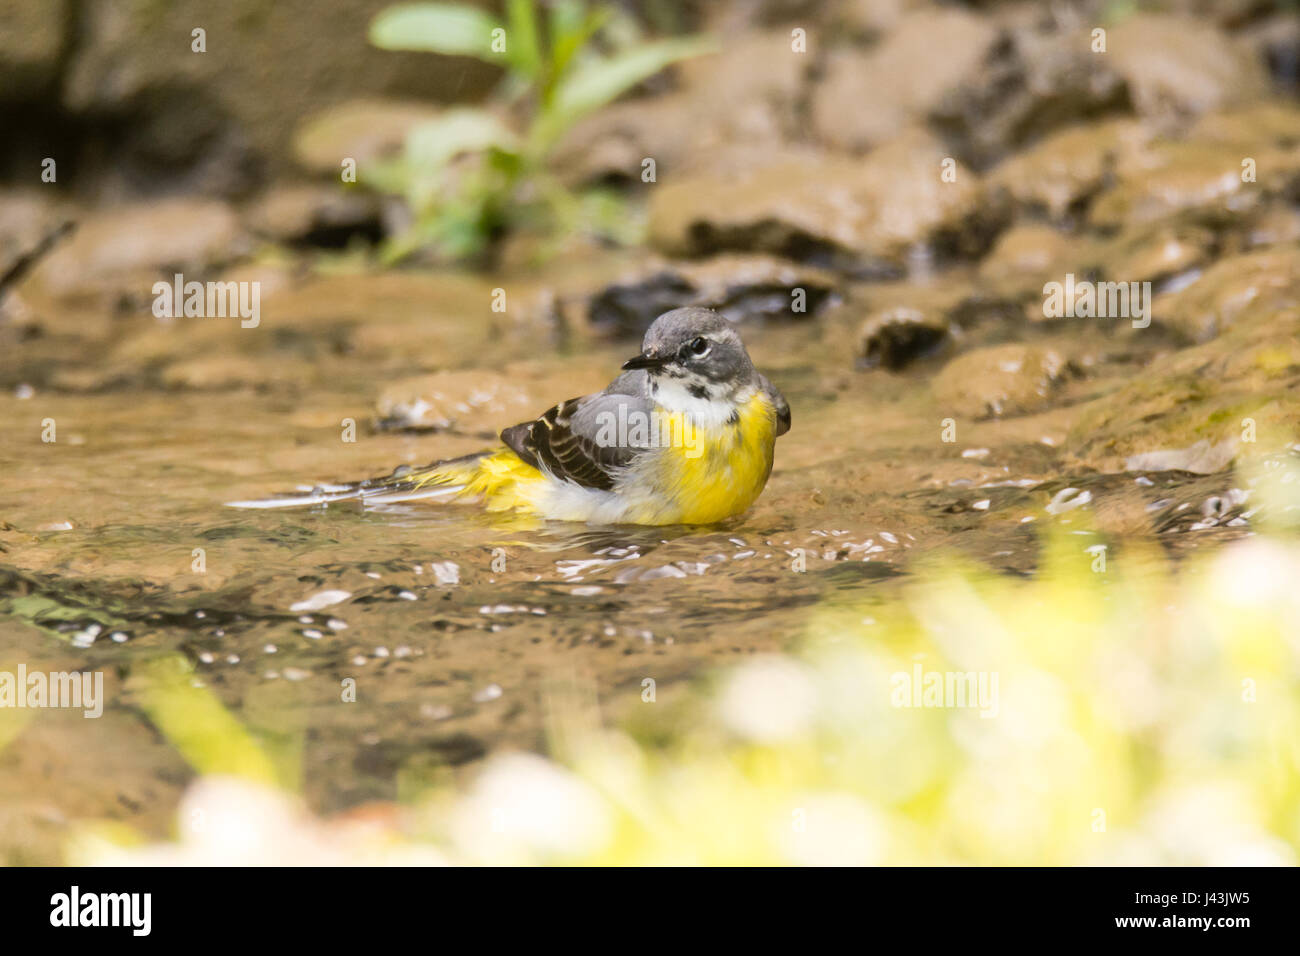 Grey wagtail (Motacilla cinerea) bathing in stream. Colourful female bird in the family Motacillidae, taking a bath in shallow water Stock Photo